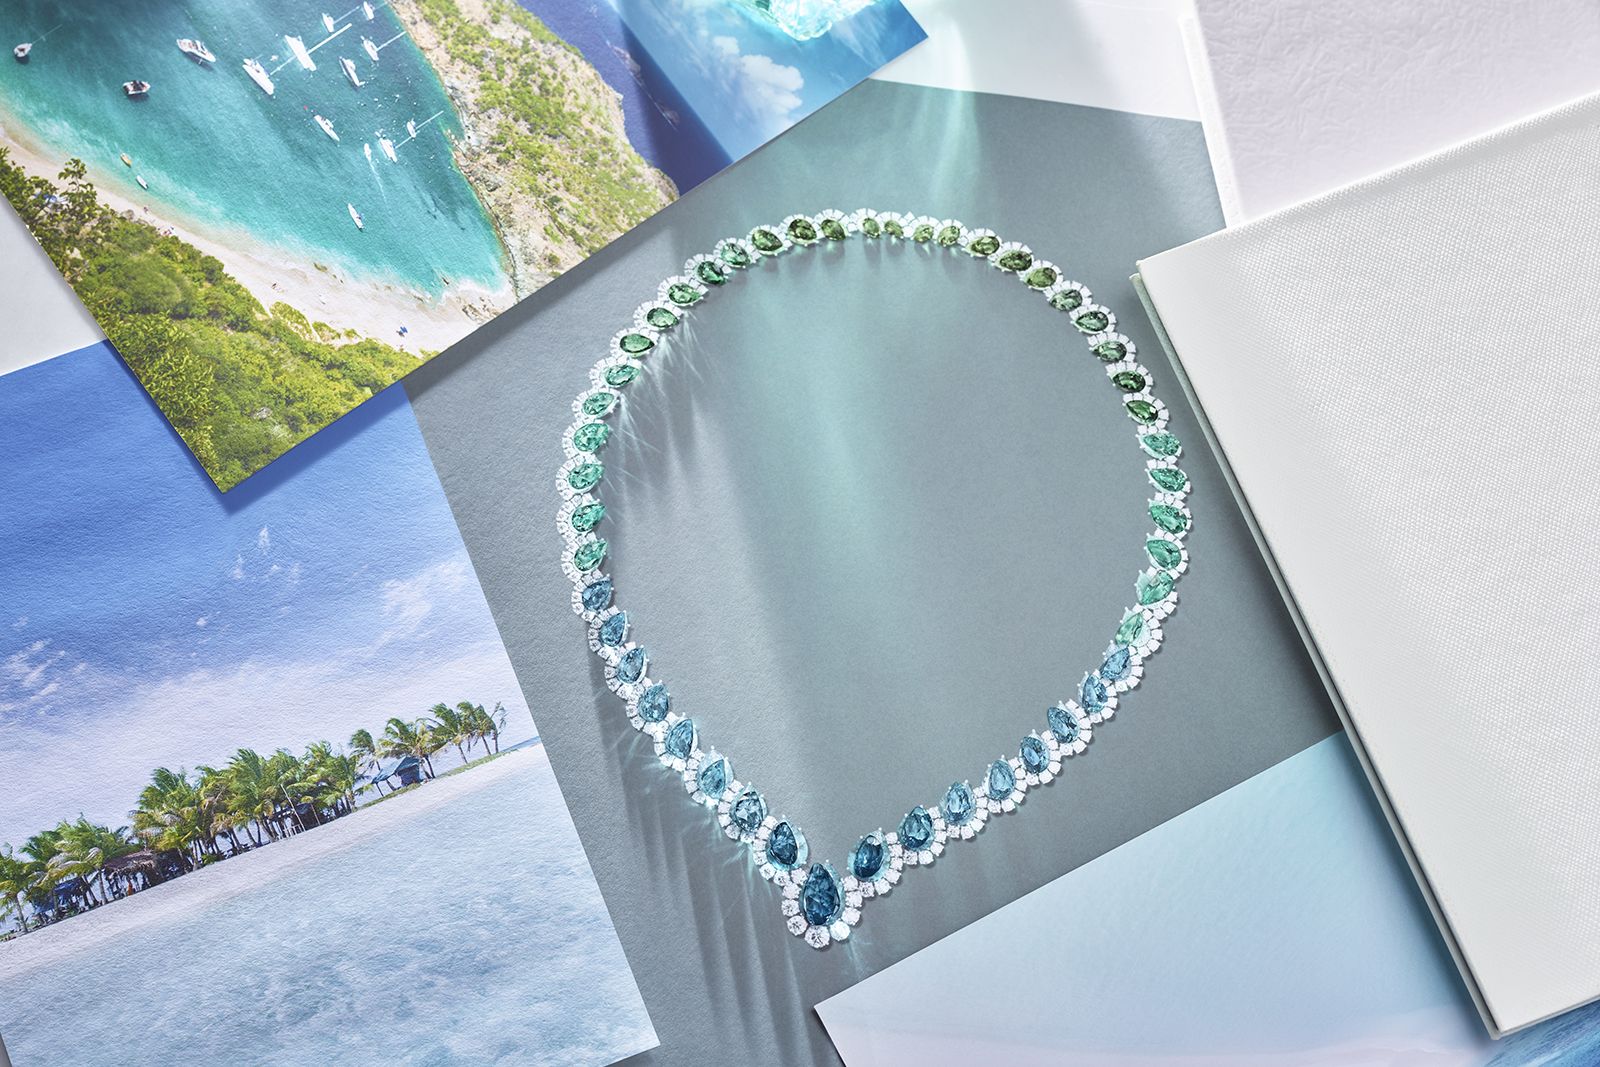 Rendering of Harry Winston Paraiba tourmaline, diamond and white gold St Barts necklace from the Majestic Escapes High Jewellery collection 